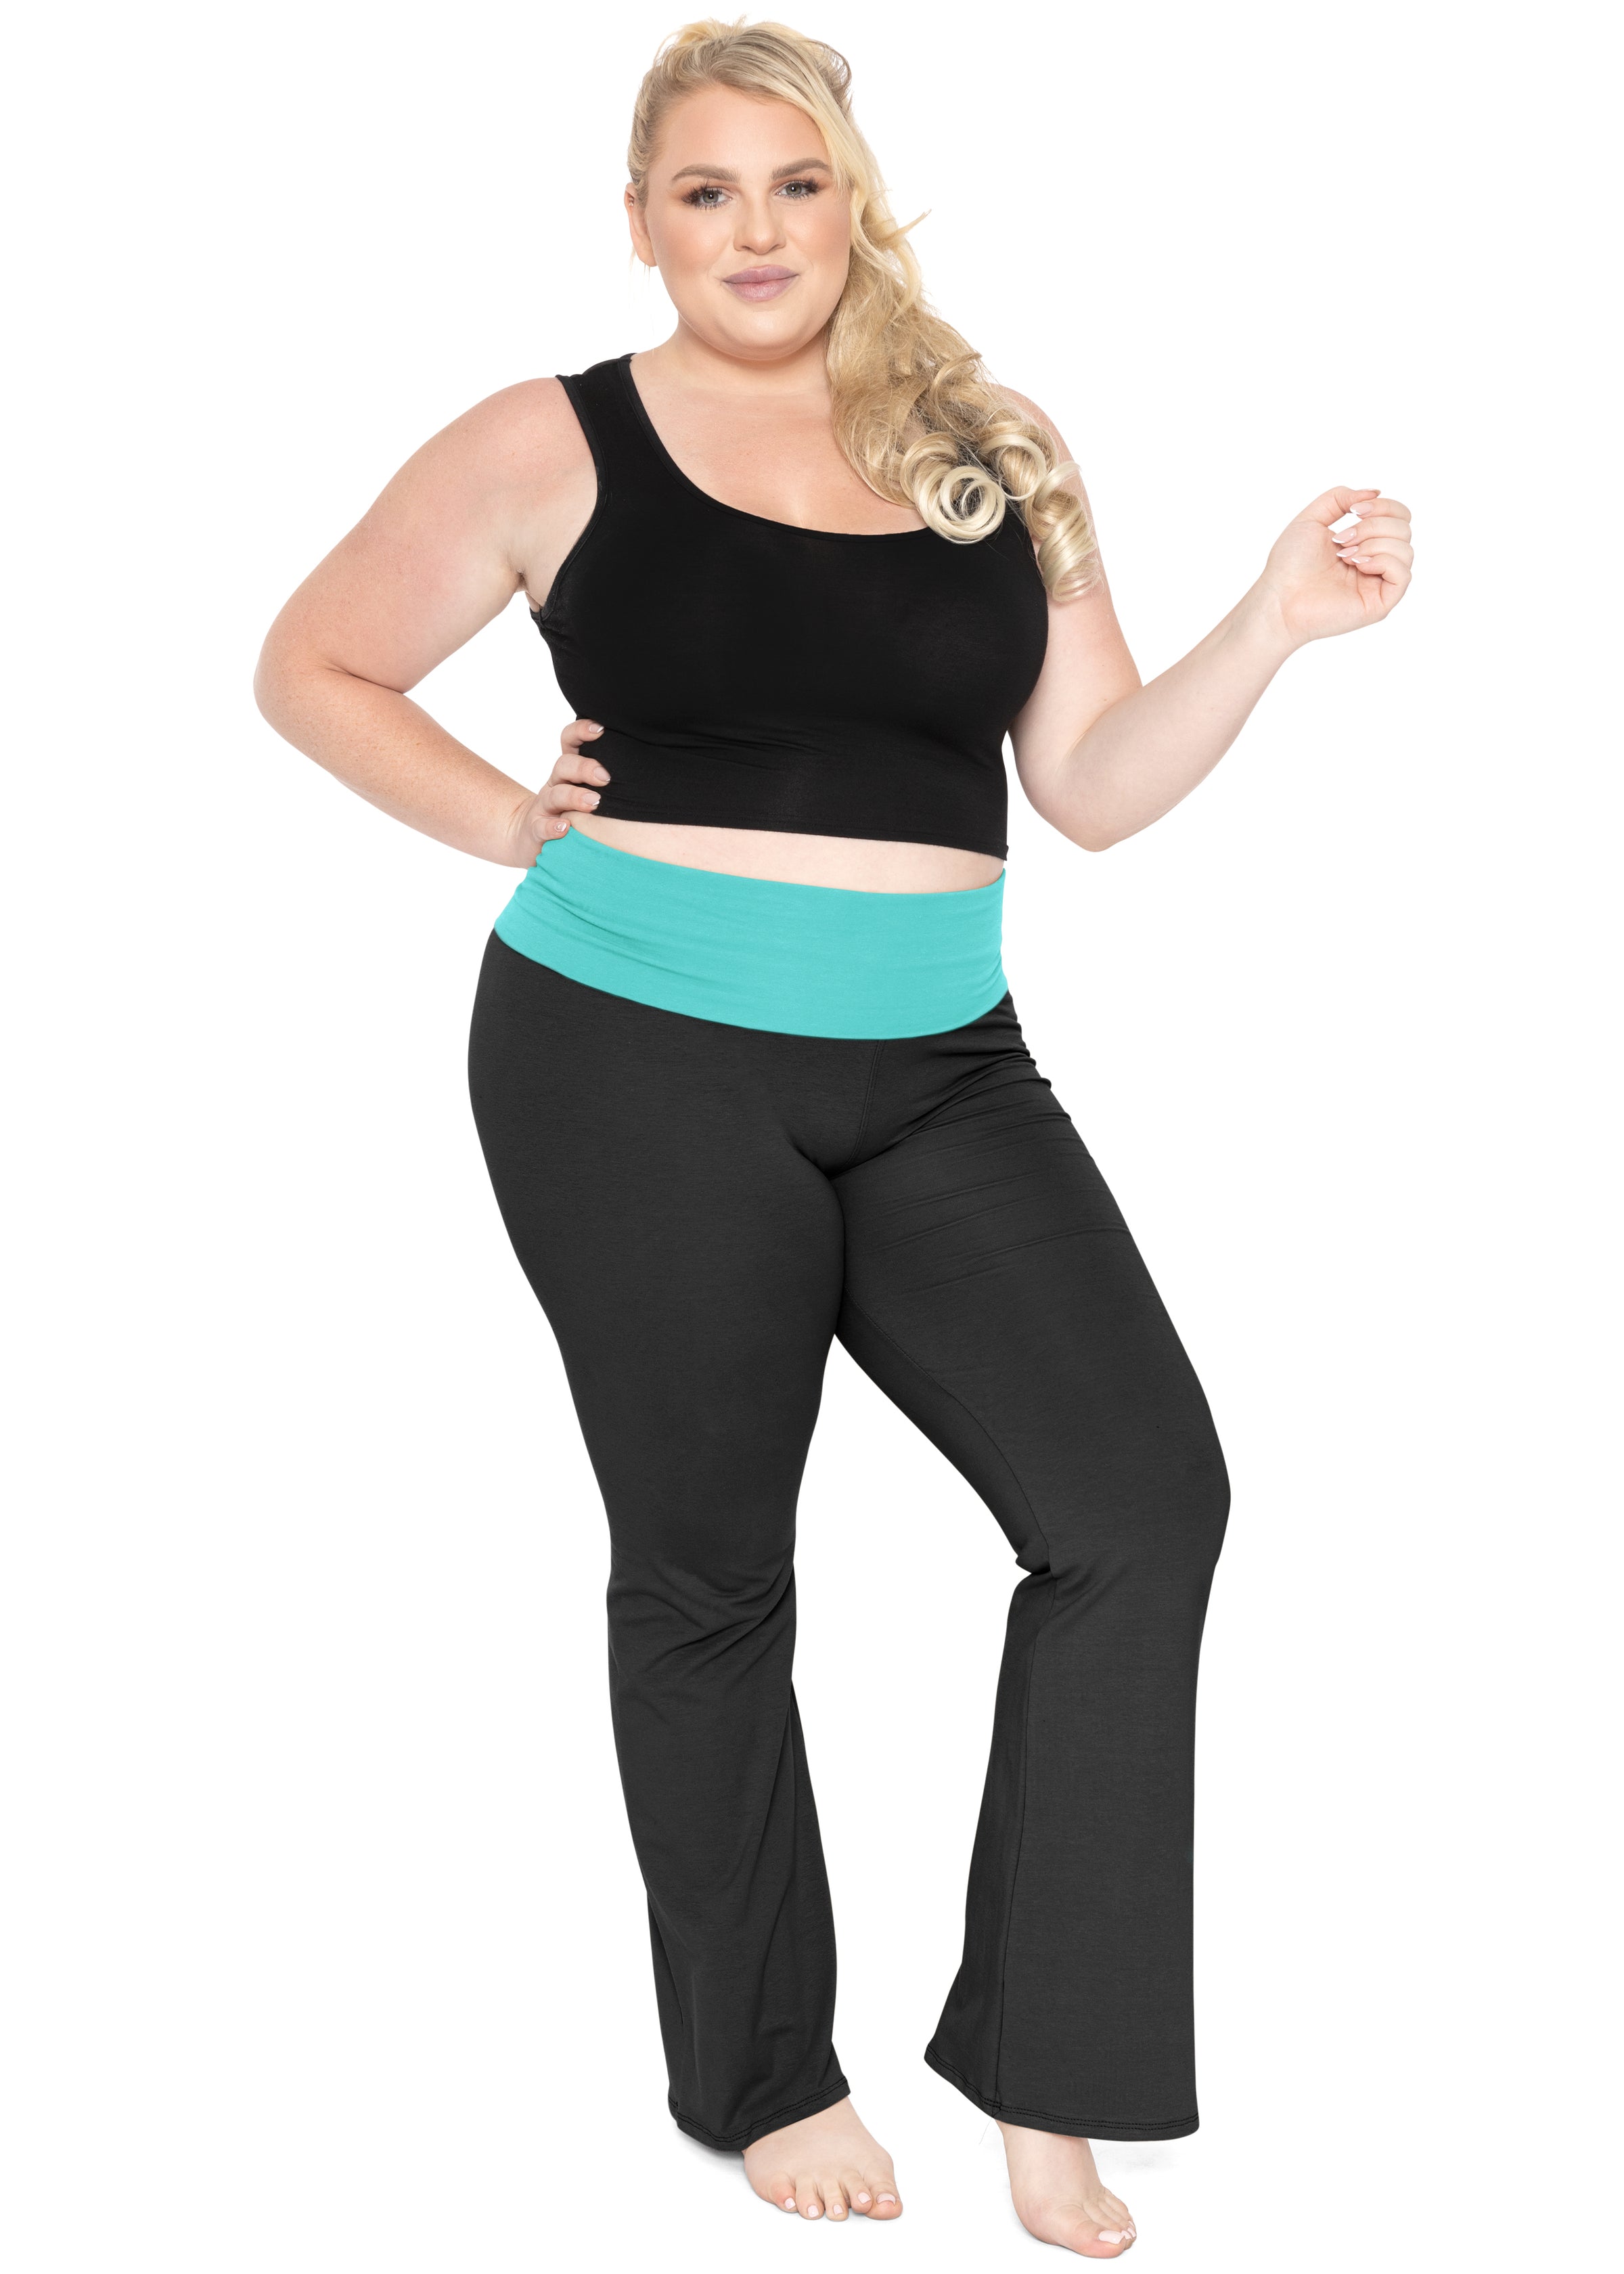 Women's Plus Size Activewear Guide | Simply Be